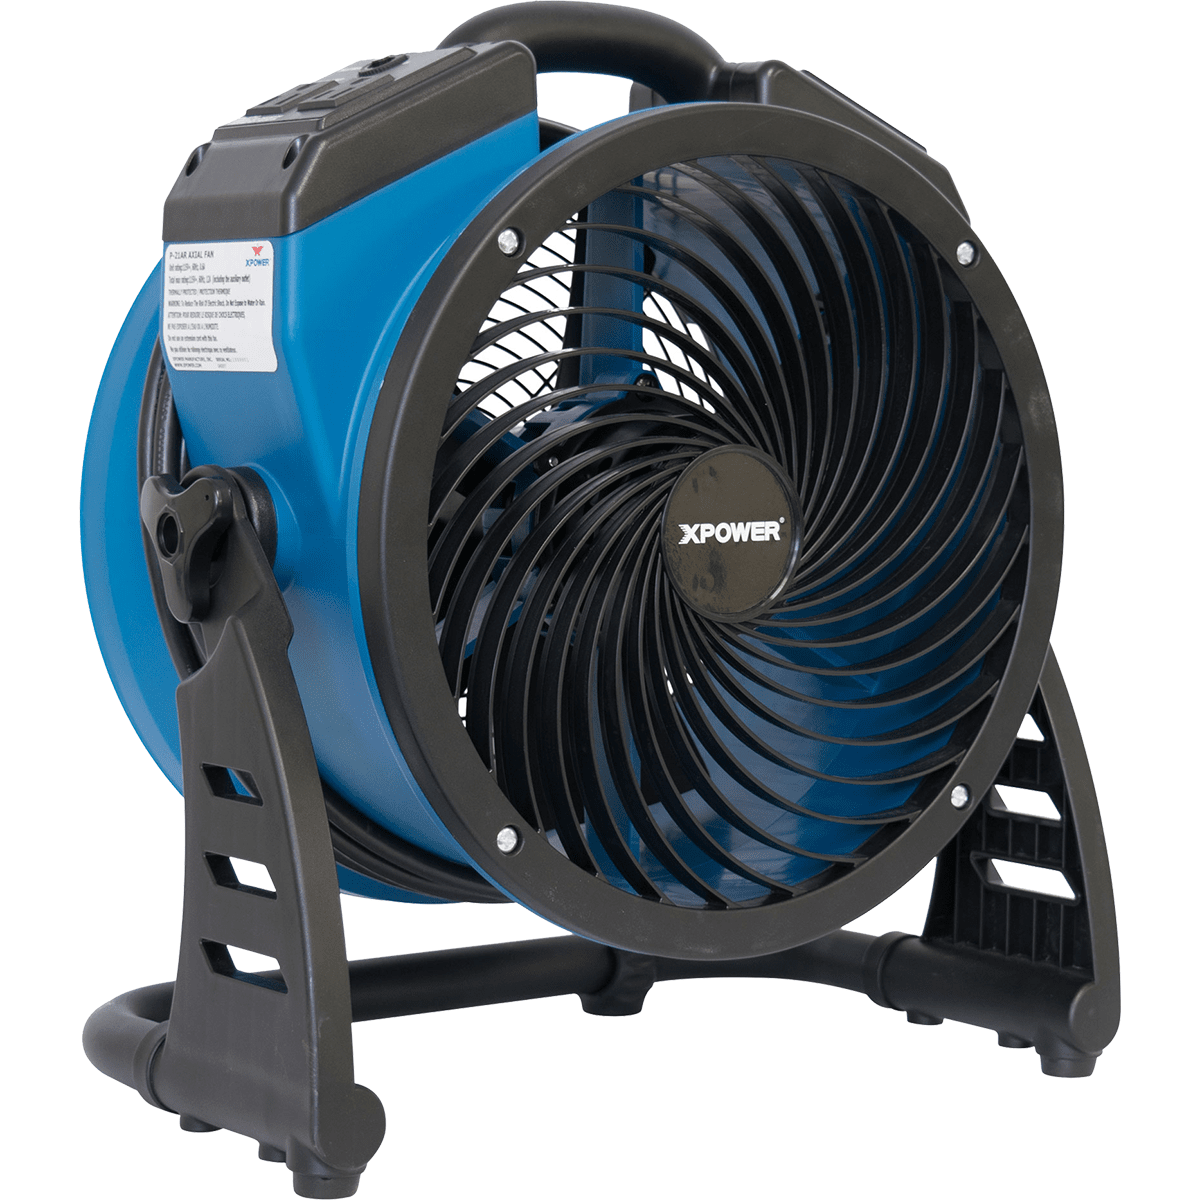 XPOWER 1100 CFM Industrial Axial Air Mover